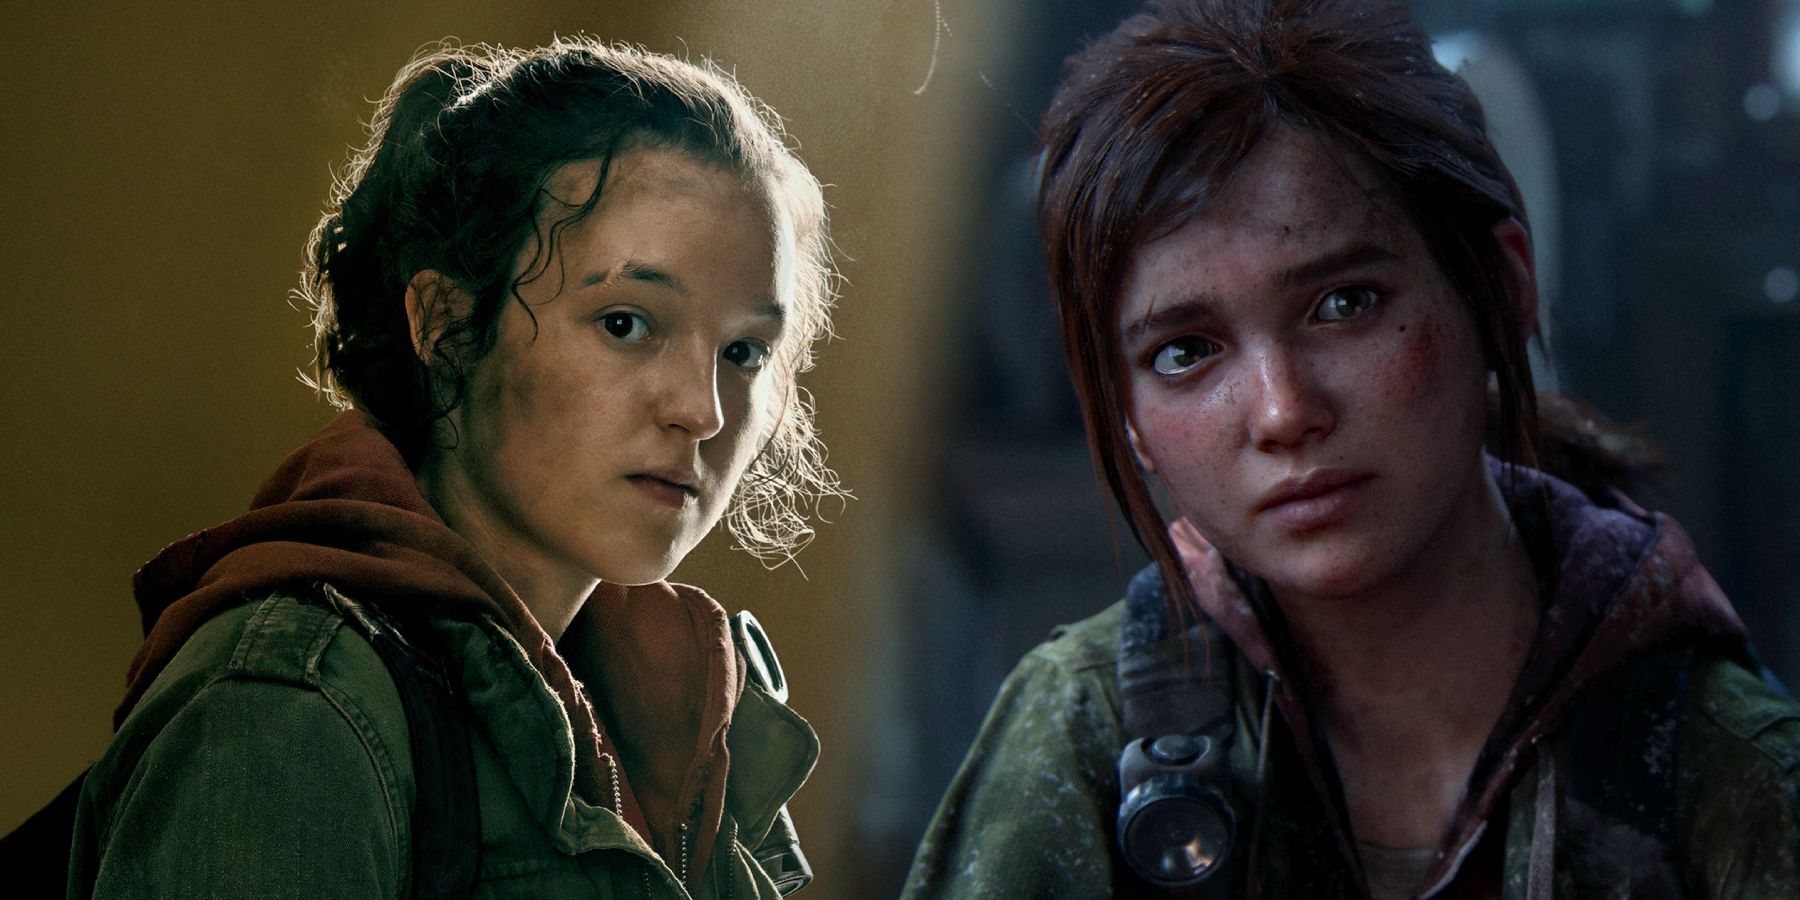 Last of Us': 'Game of Thrones' Breakout Bella Ramsey to Star as